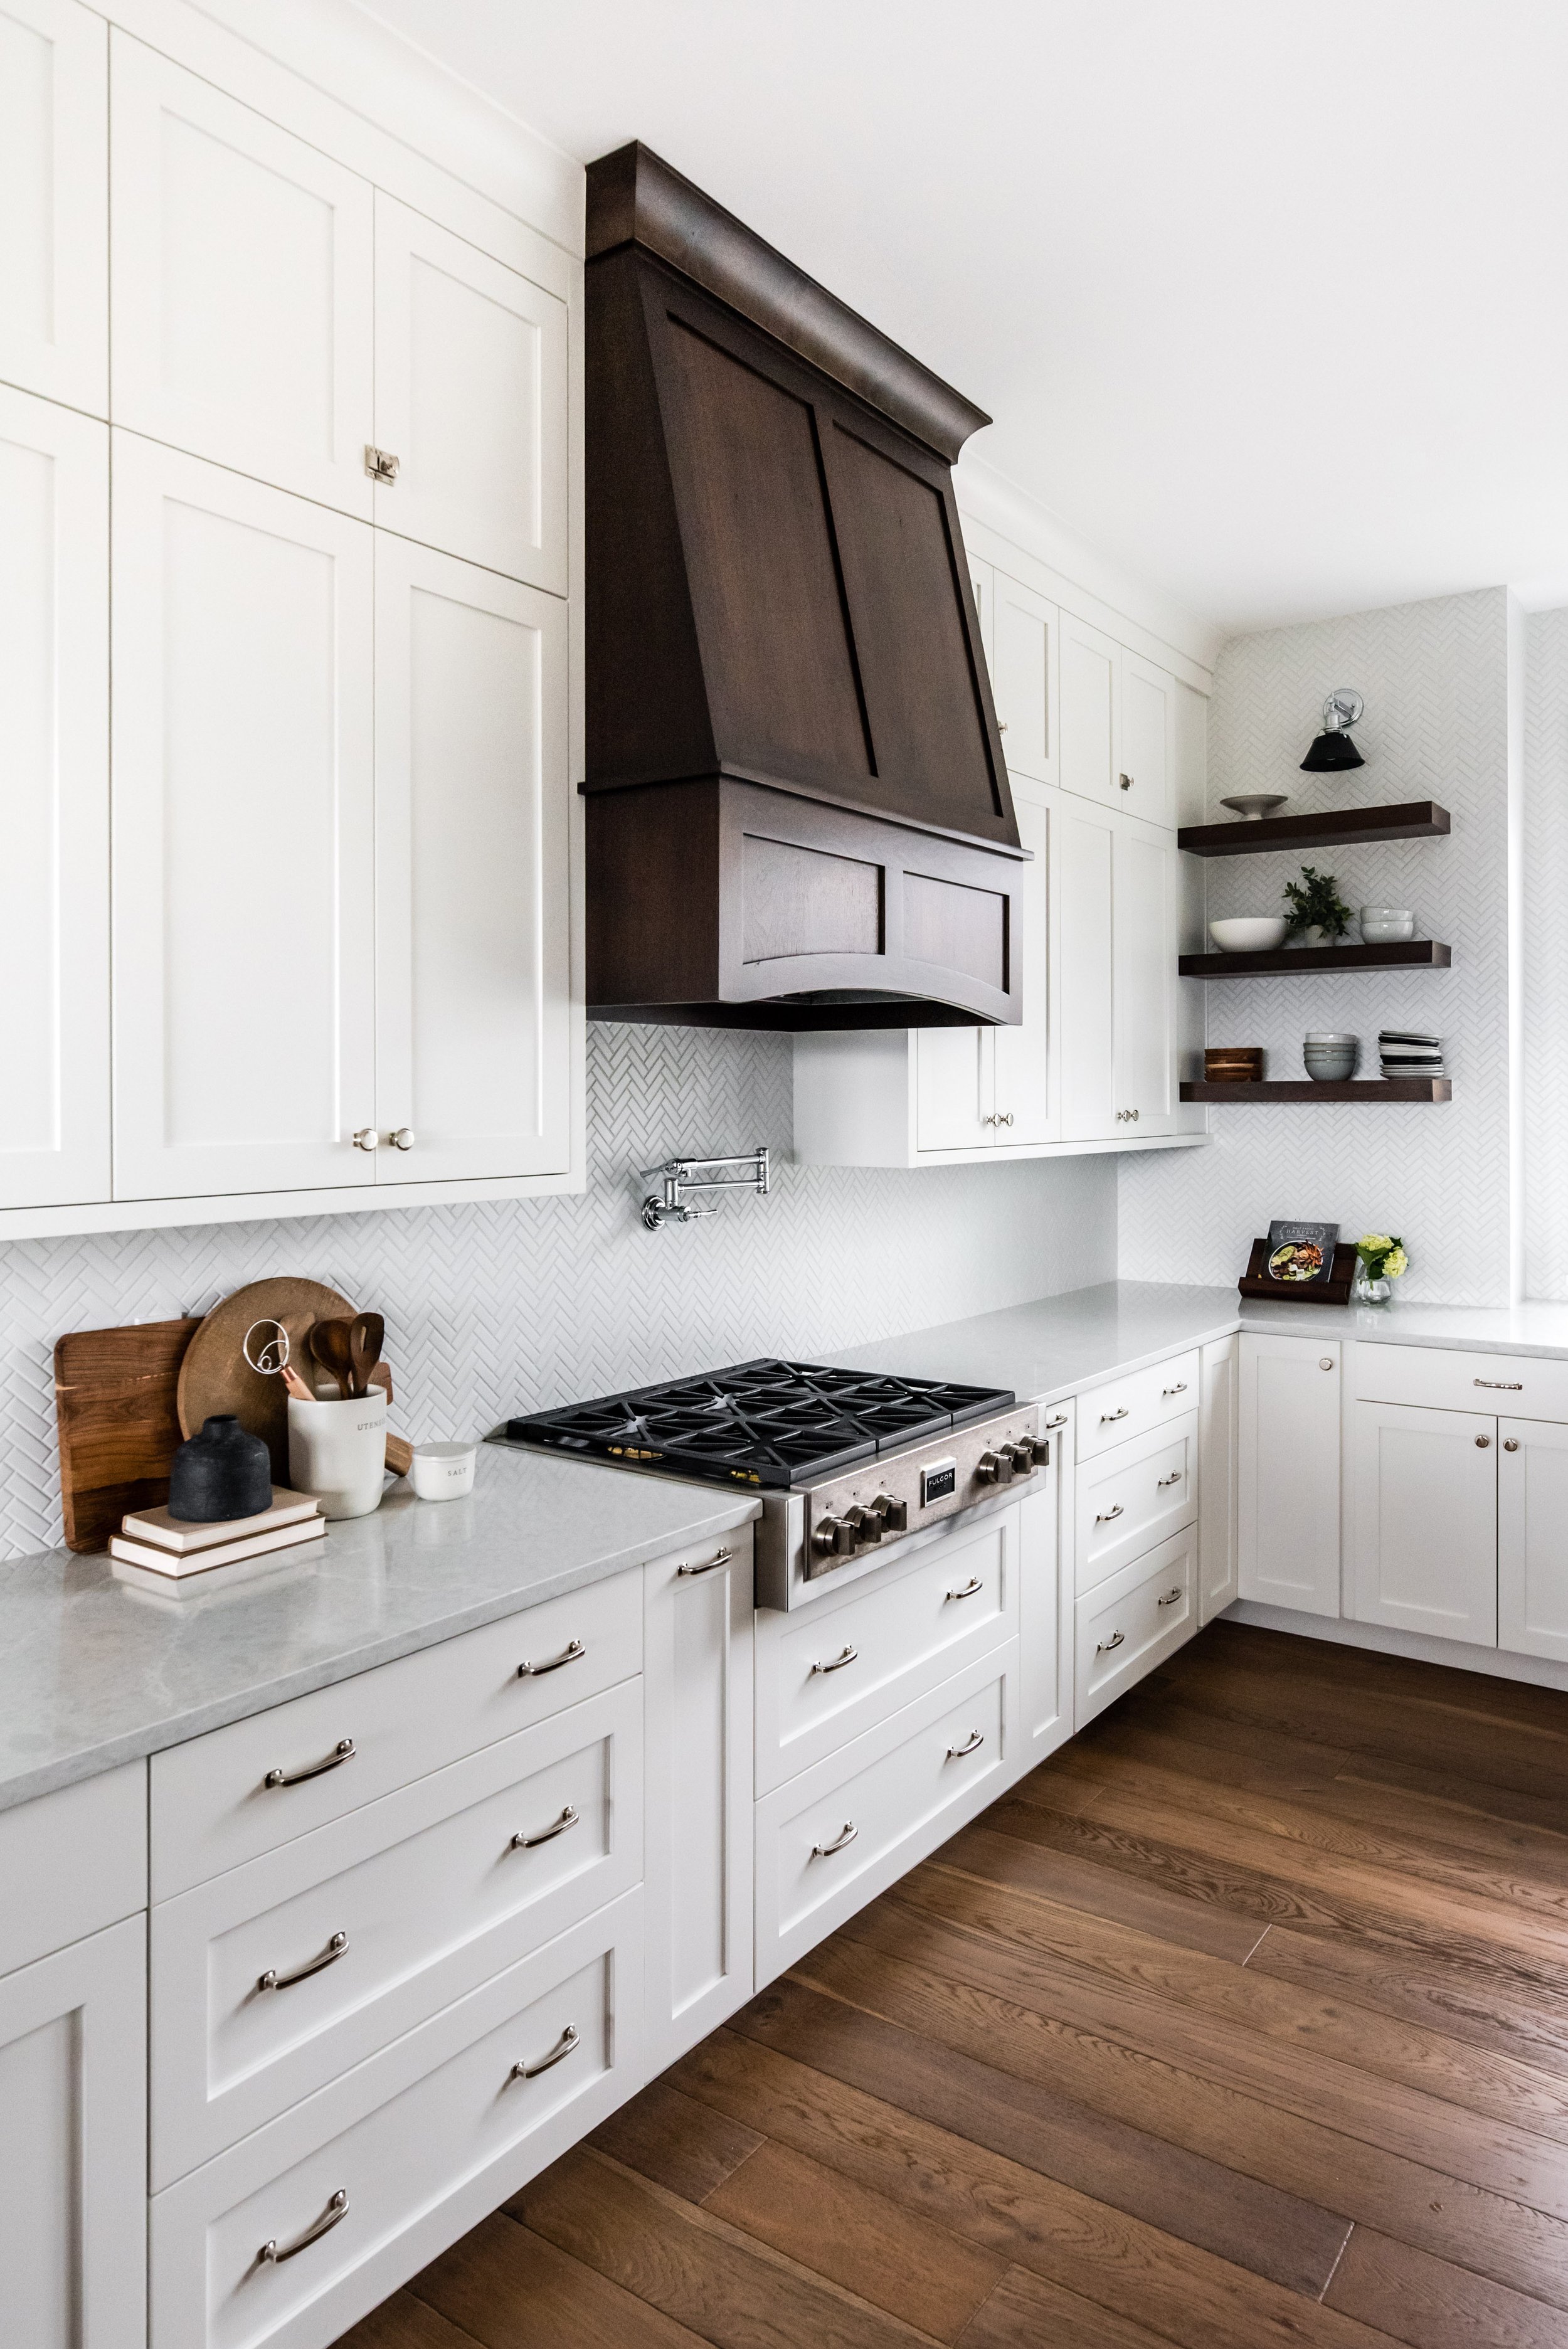  Liz Powell Design gives reasons to consider different types of countertops for different parts of your home during the new build process. #LizPowellDesign #InteriorDesignUtah #LizPowellDesign #InteriorDesignUtah #buildingahome #countertops #dreamhom